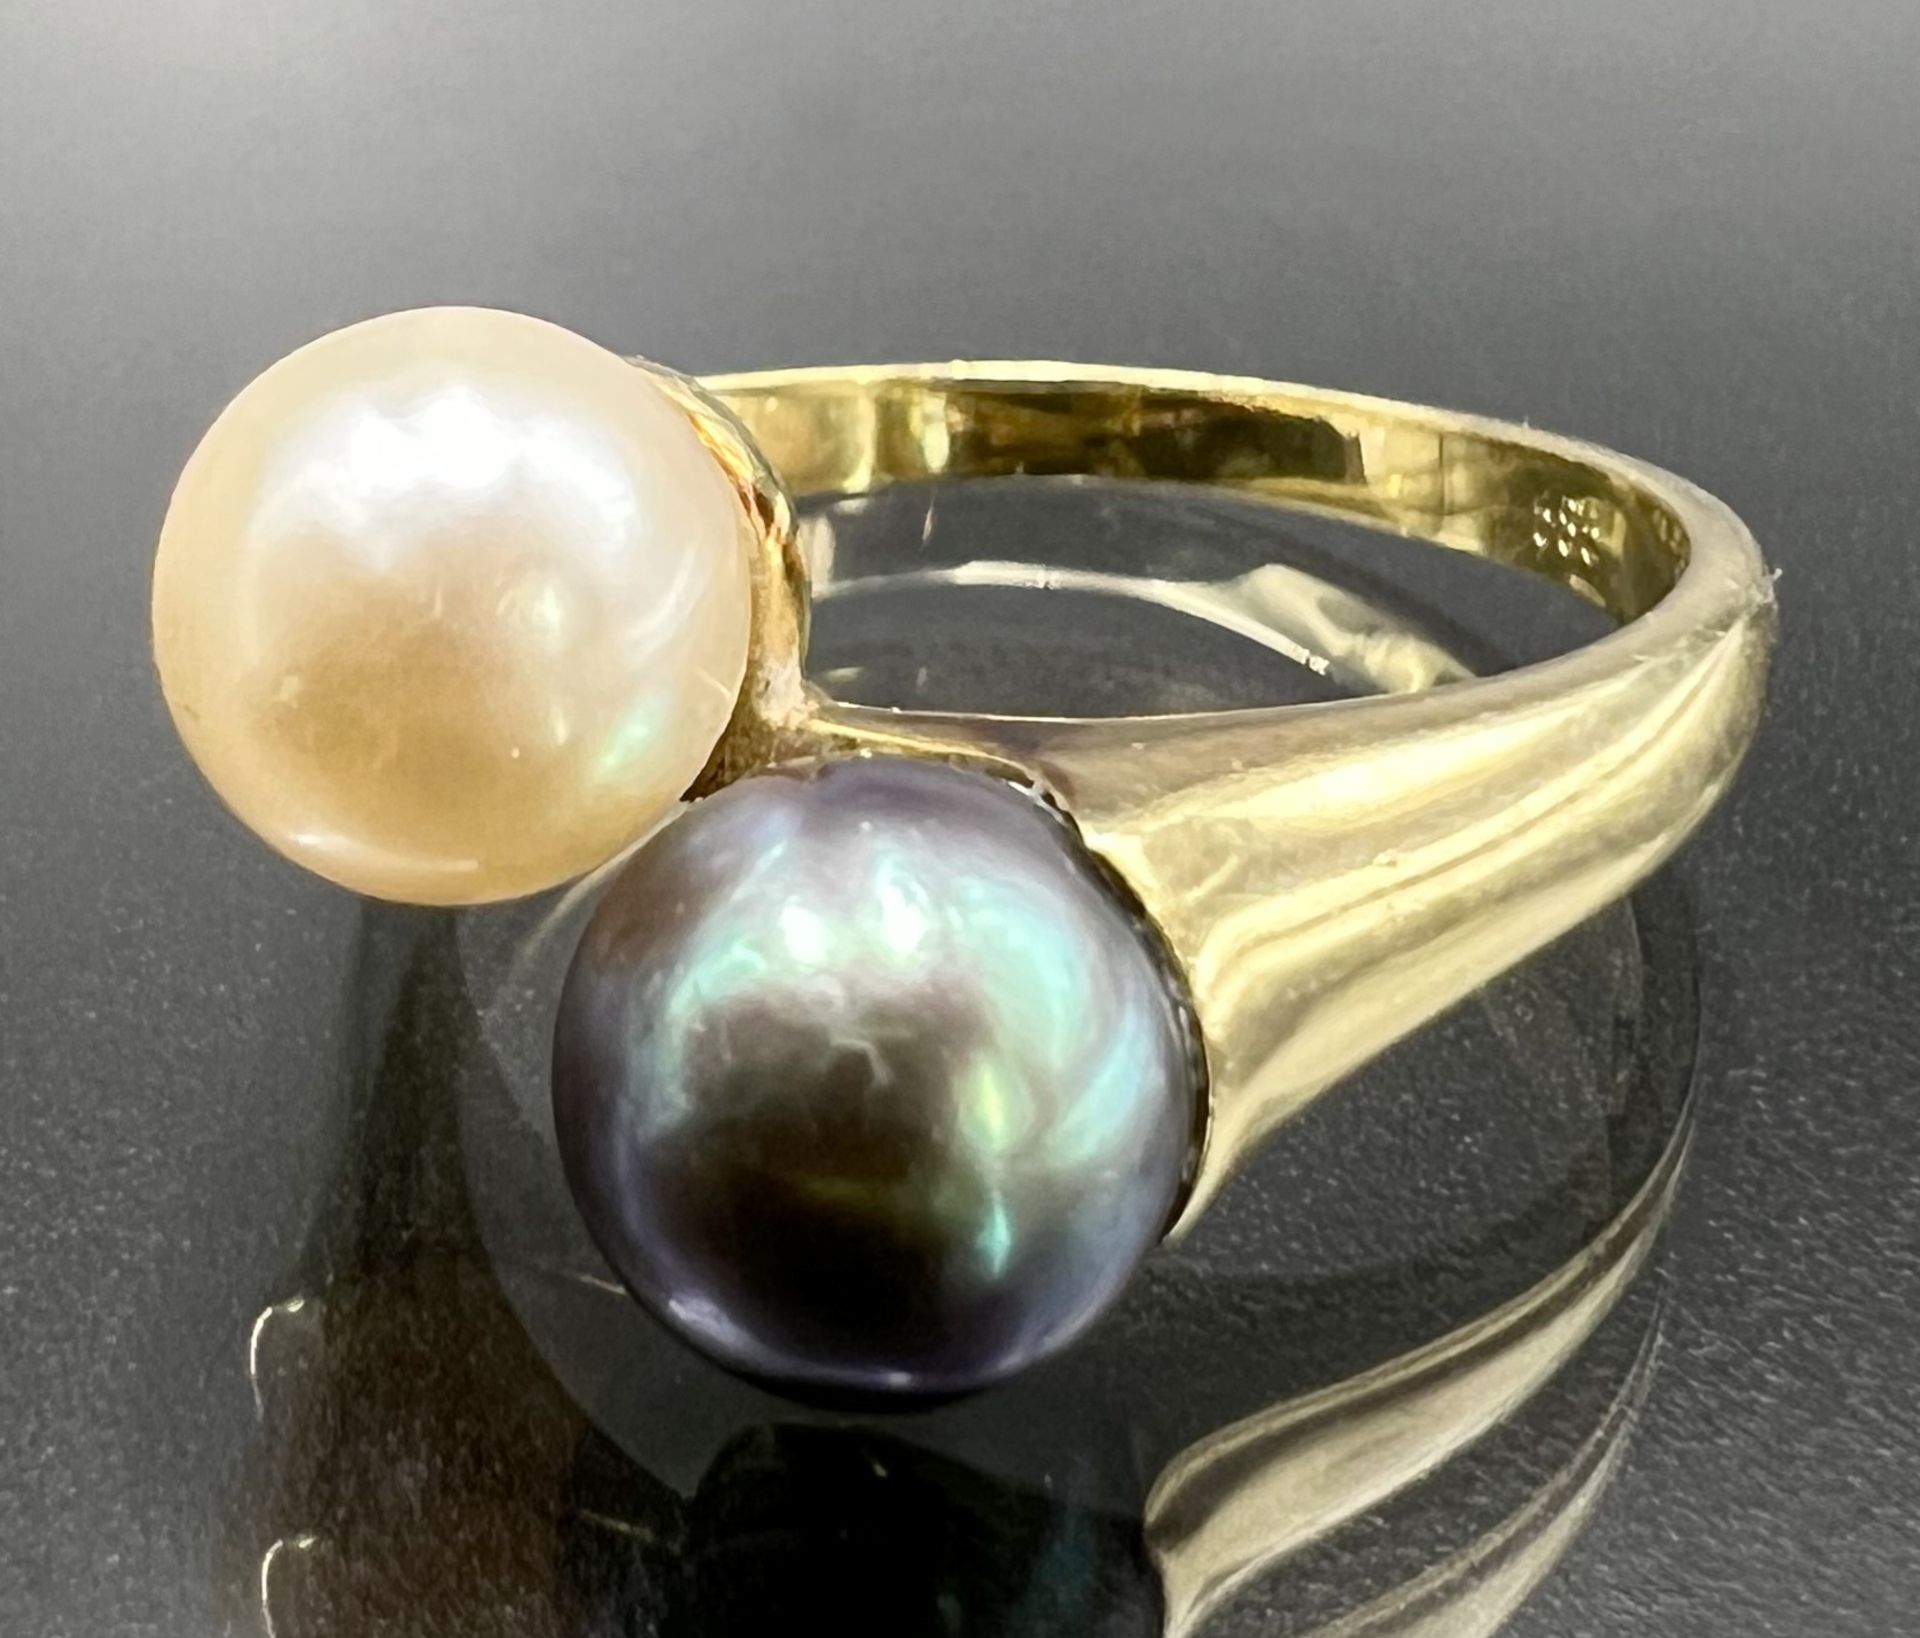 Ladies' ring 585 yellow gold with two pearls.